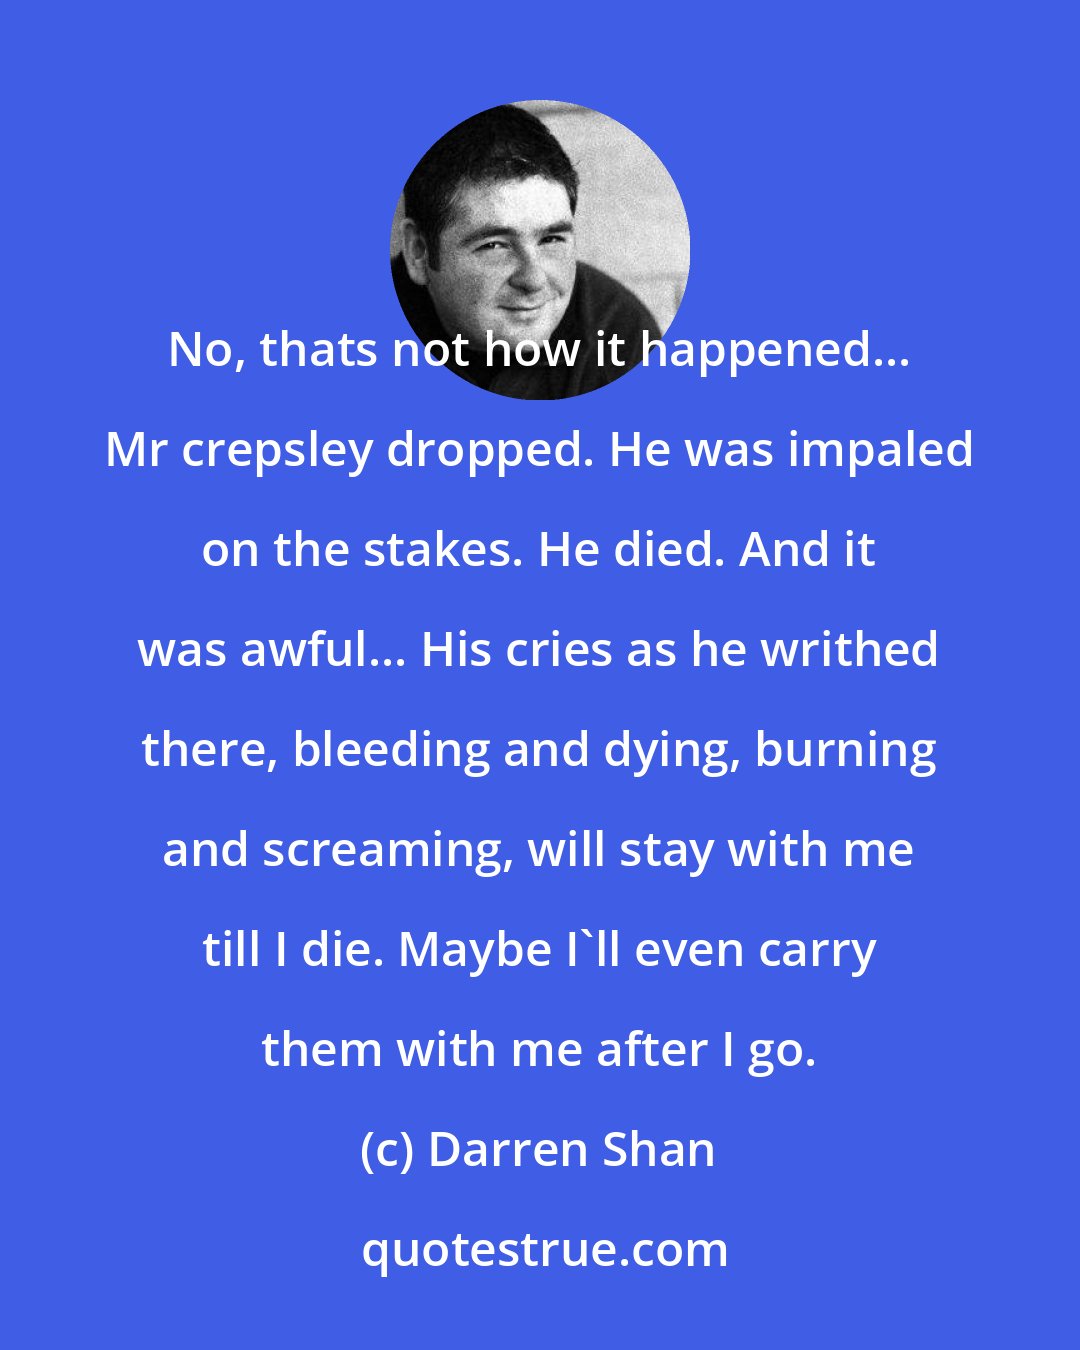 Darren Shan: No, thats not how it happened... Mr crepsley dropped. He was impaled on the stakes. He﻿ died. And it was awful... His cries as he writhed there, bleeding and dying, burning and screaming, will stay with me till I die. Maybe I'll even carry them with me after I go.